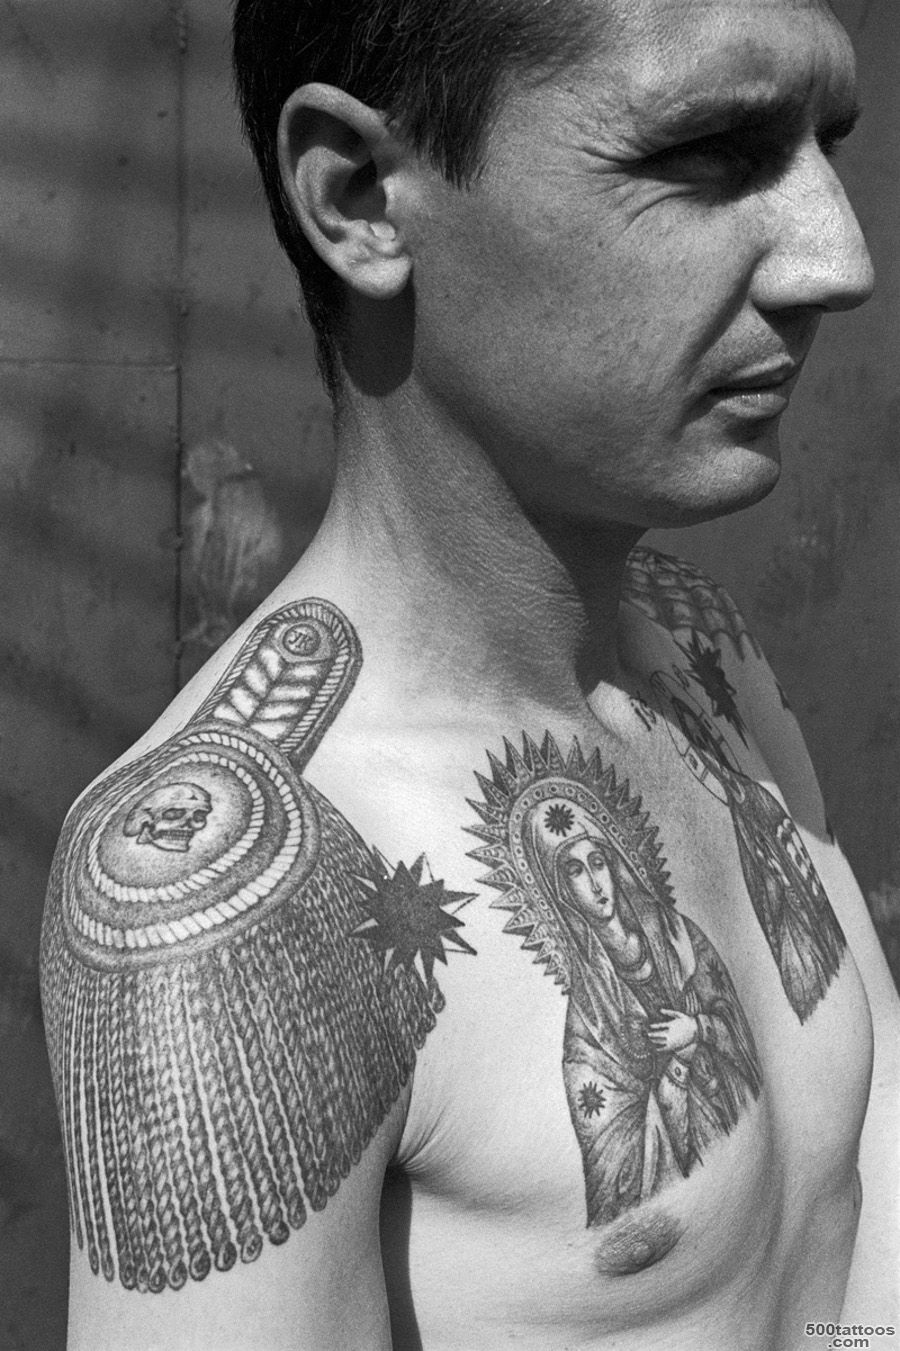 Decoding the hidden meaning behind Russian prison tattoos (Photos)_2